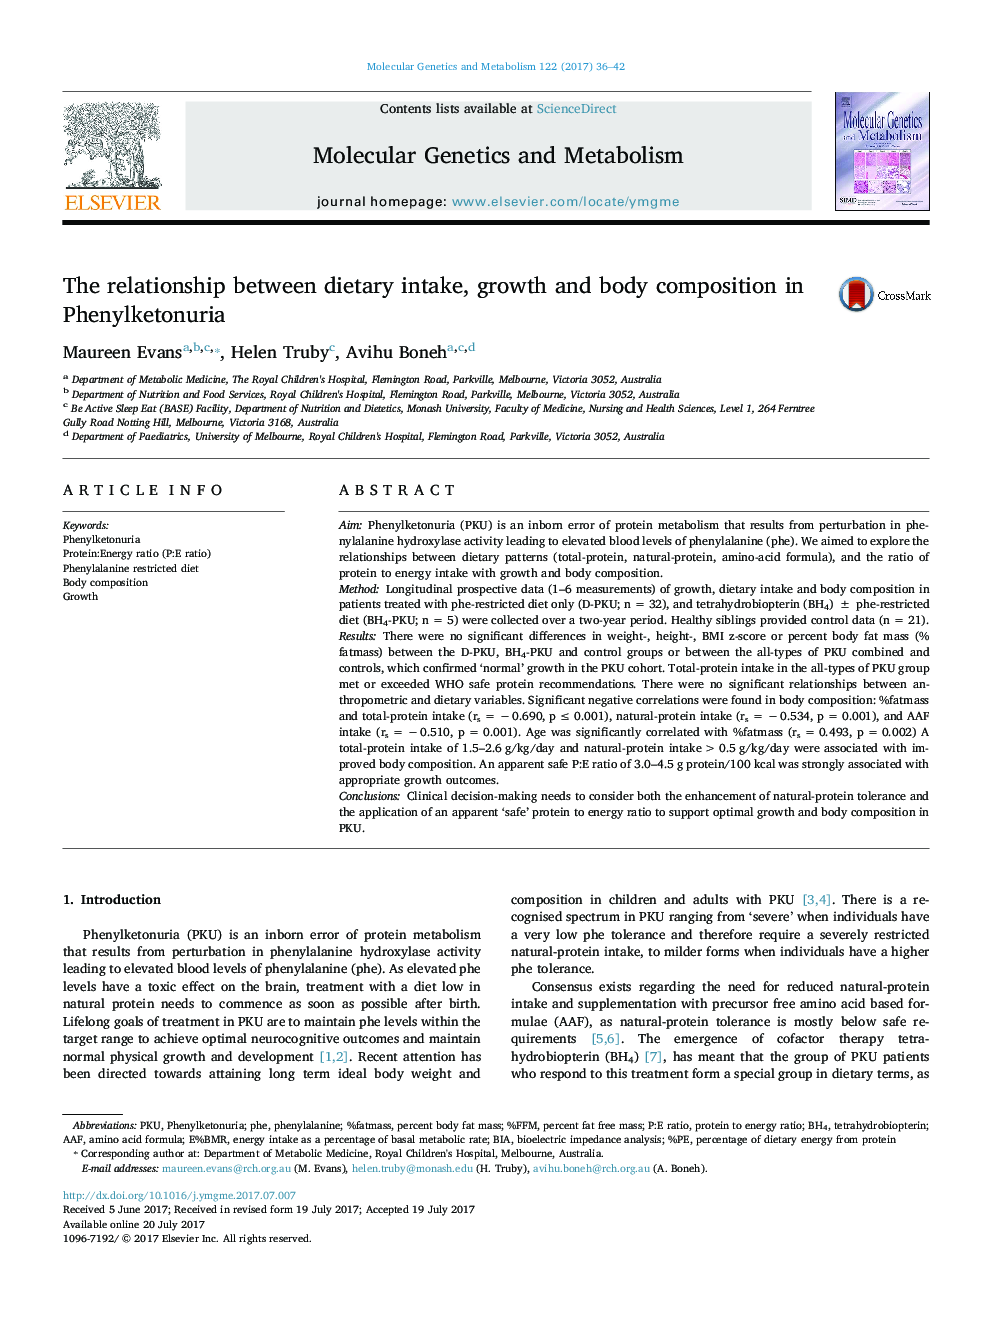 The relationship between dietary intake, growth and body composition in Phenylketonuria